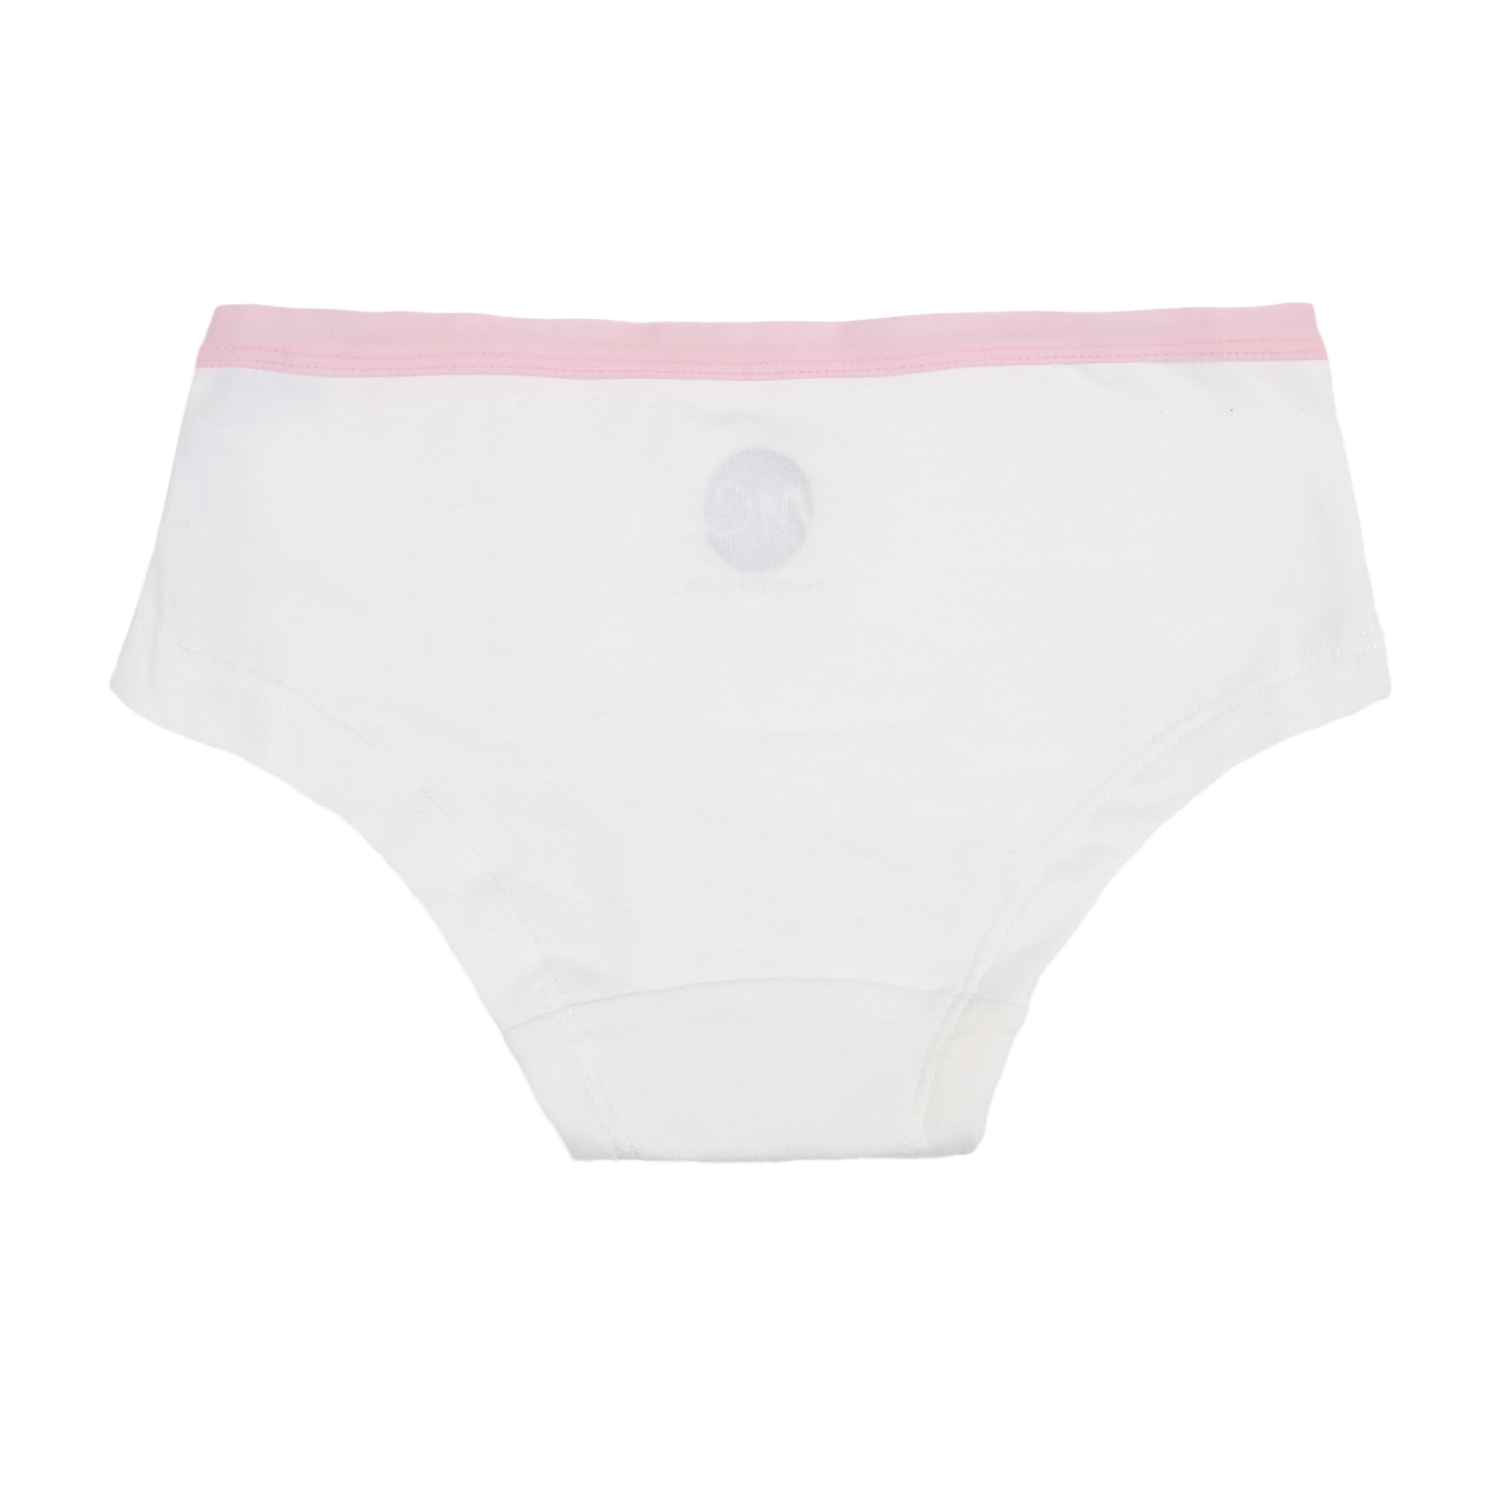 Girls Printed Briefs - Pack of 3 - Pink white